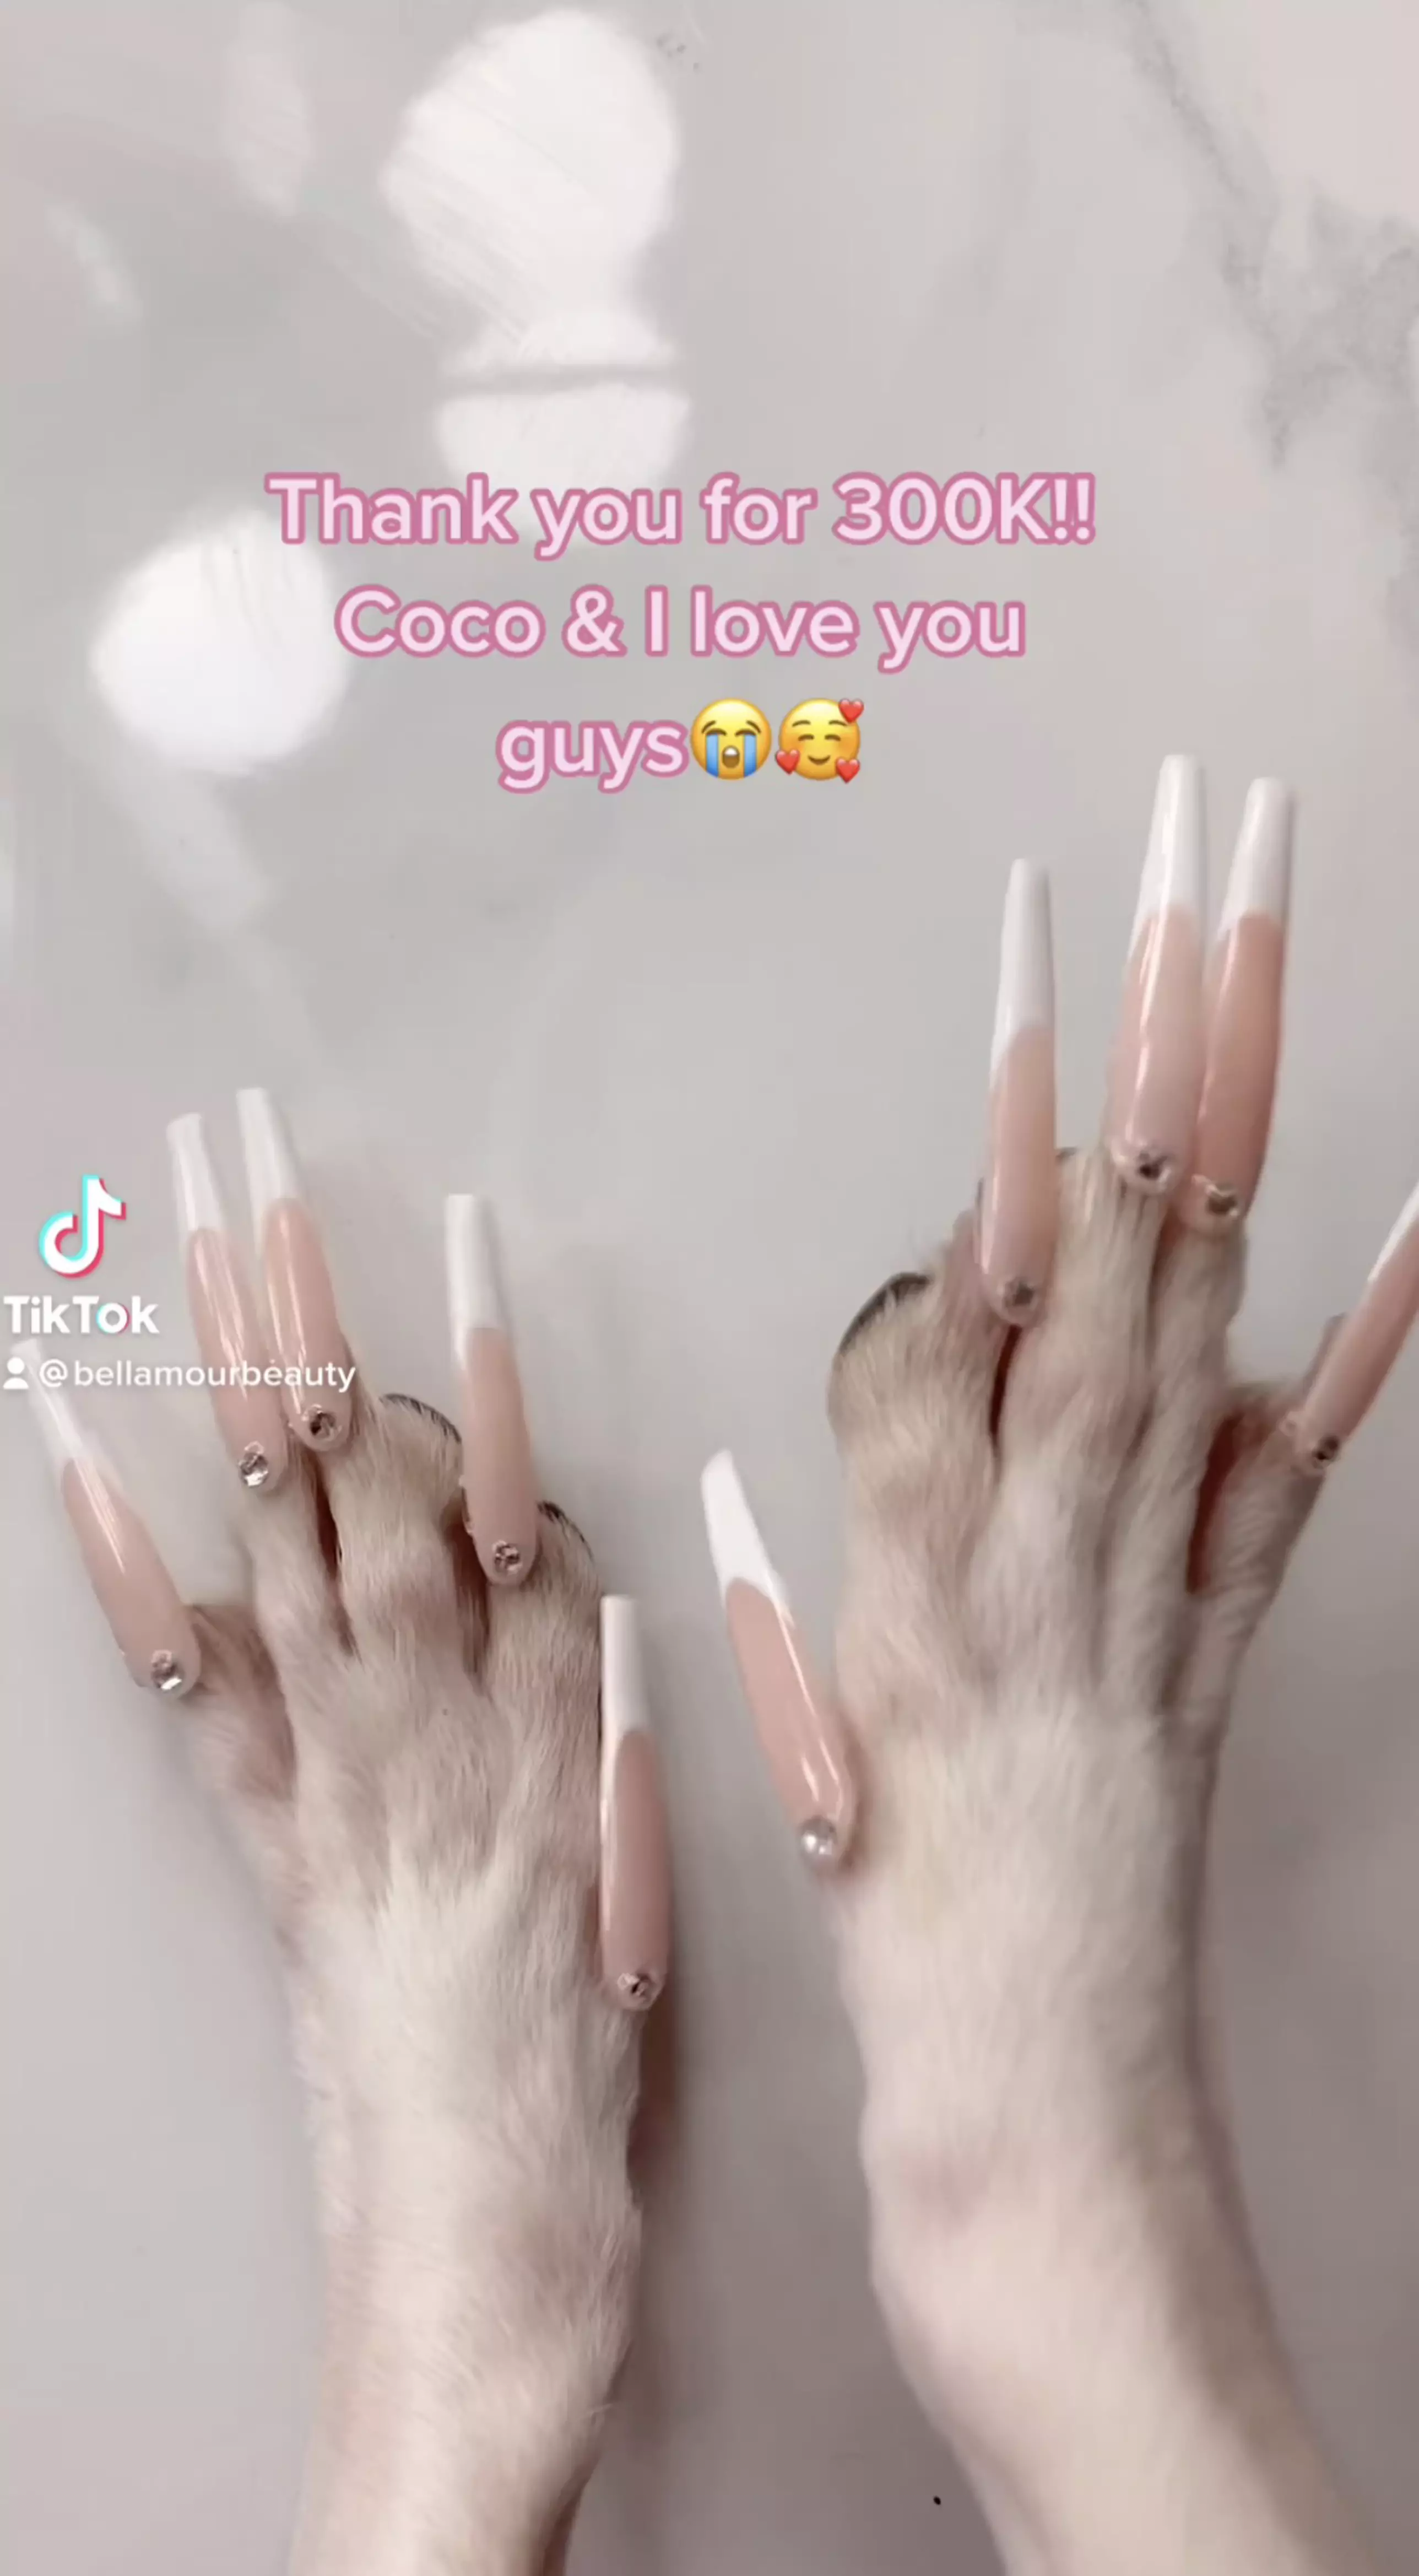 Coco the Chihuahua has gone viral on TikTok (